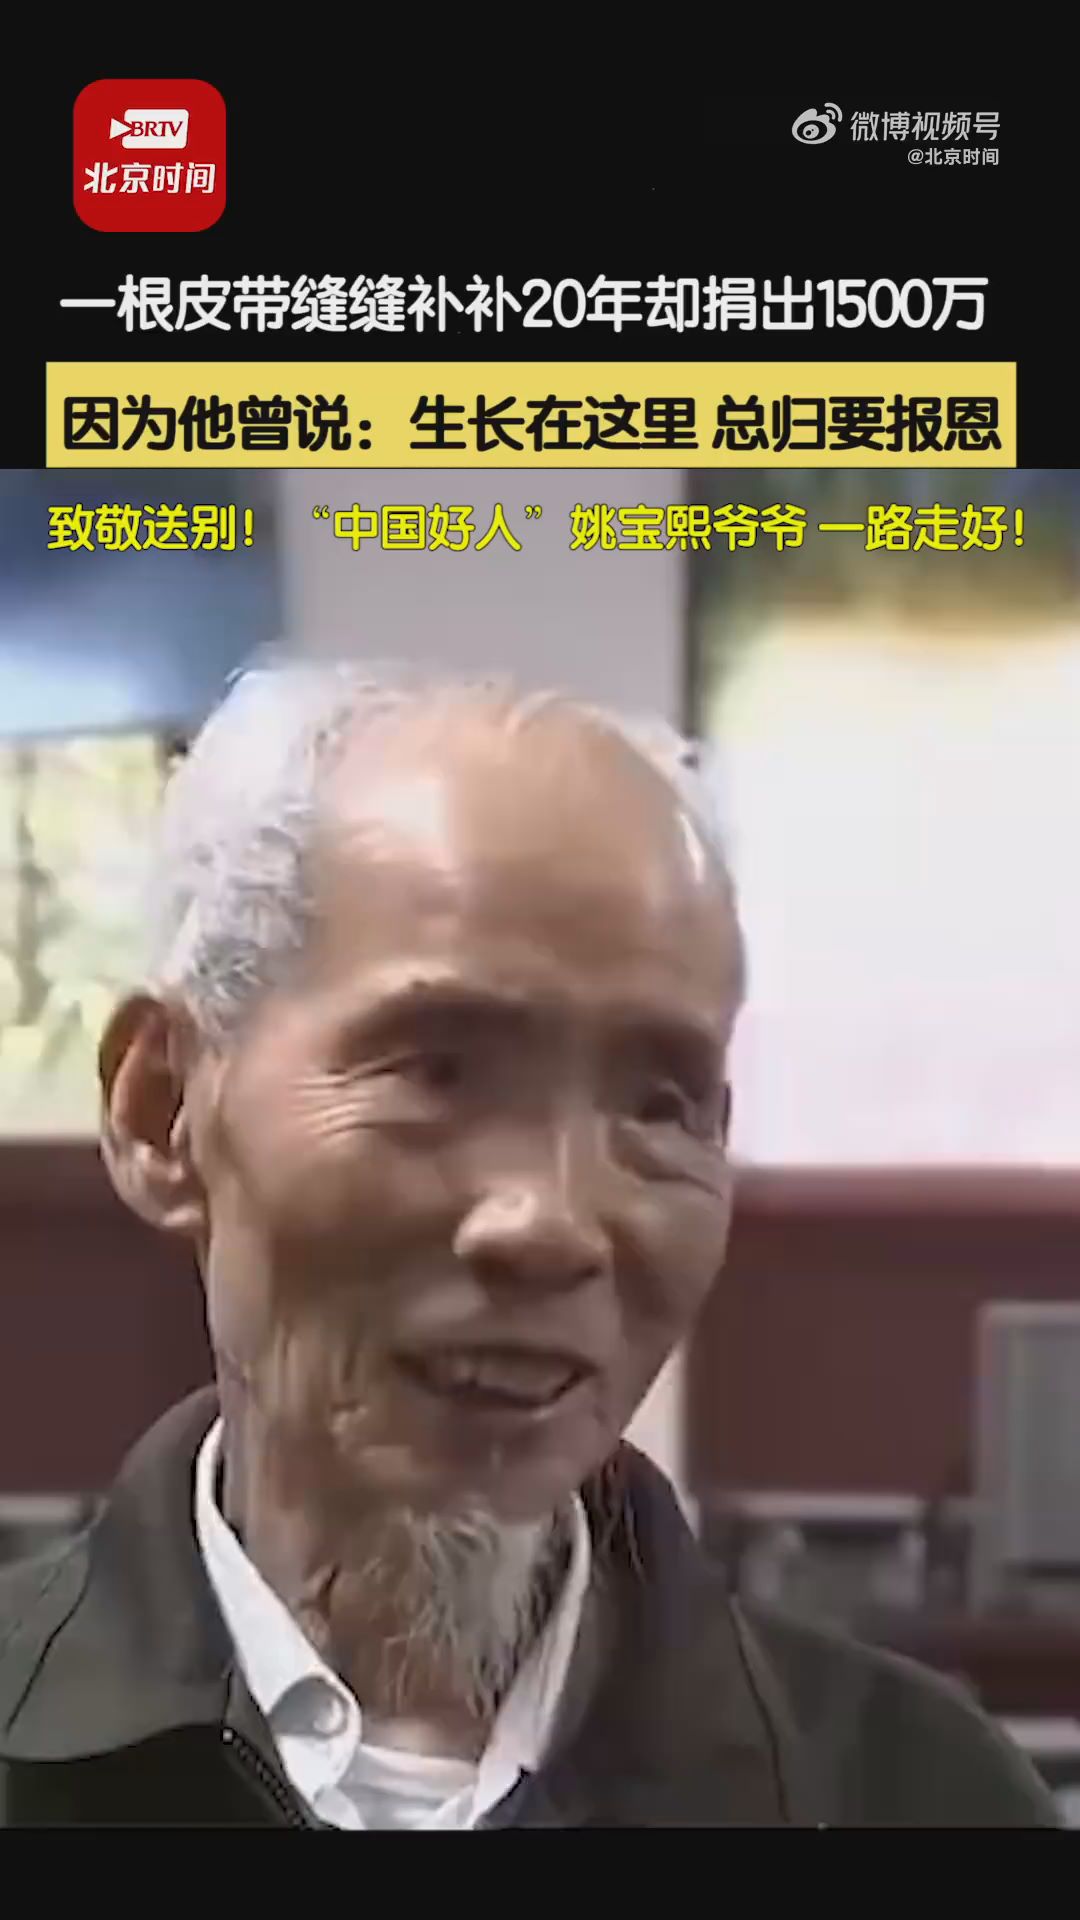  The old man has used a belt for nearly 20 years and donated 15 million yuan